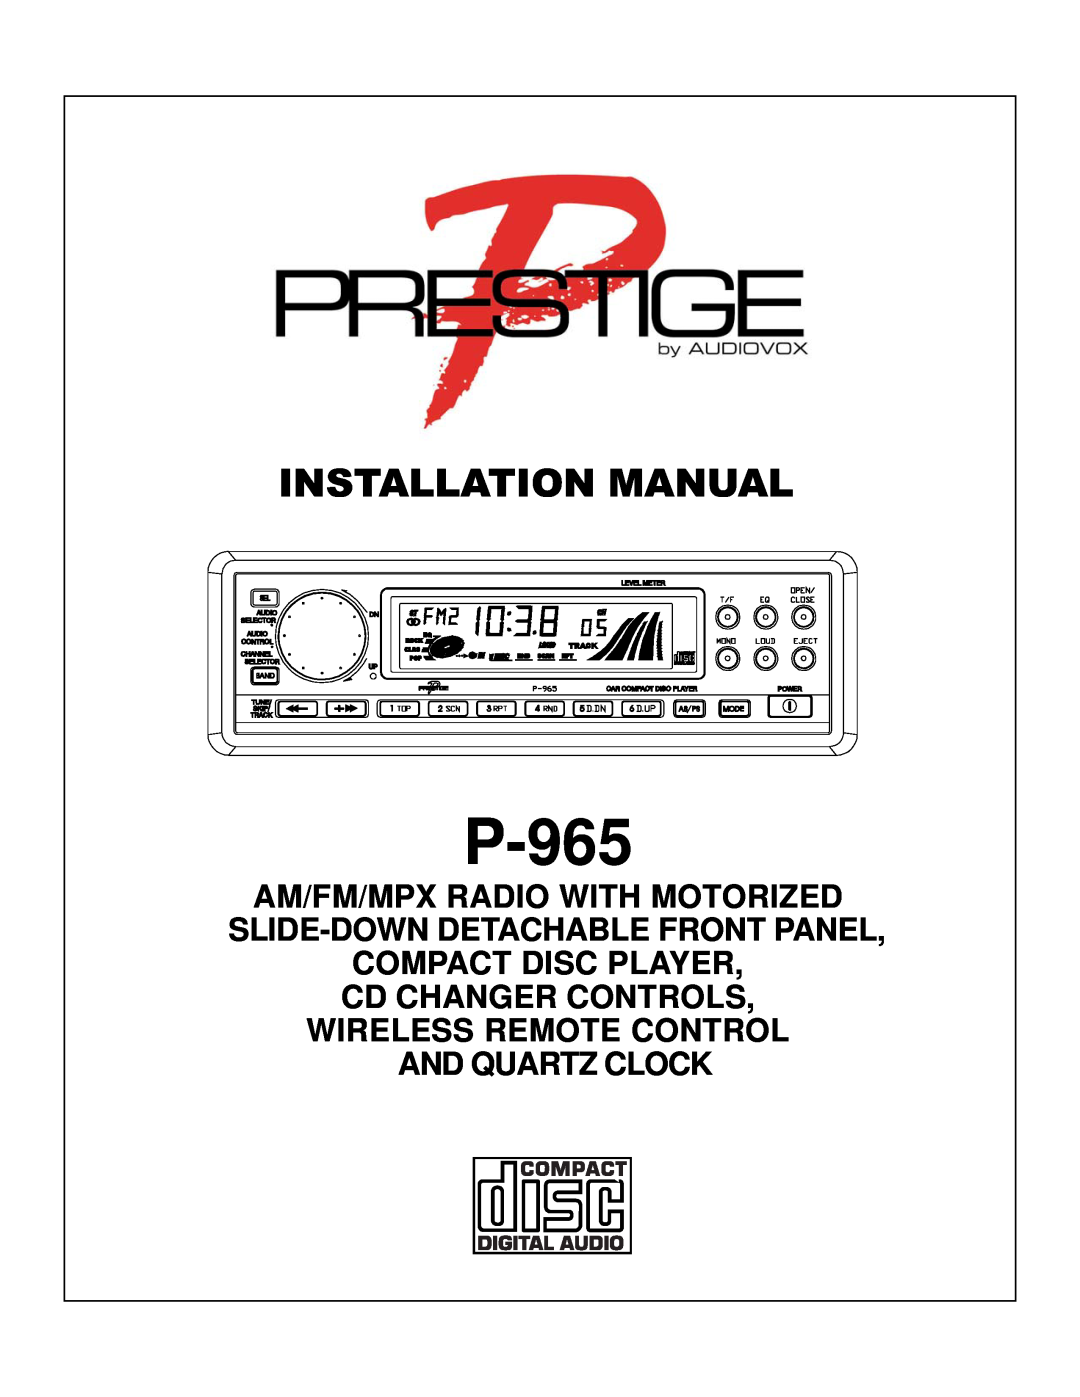 Audiovox P-965 installation manual Installation Manual, Am/Fm/Mpx Radio With Motorized, Compact Disc Player, Track, Rockeq 